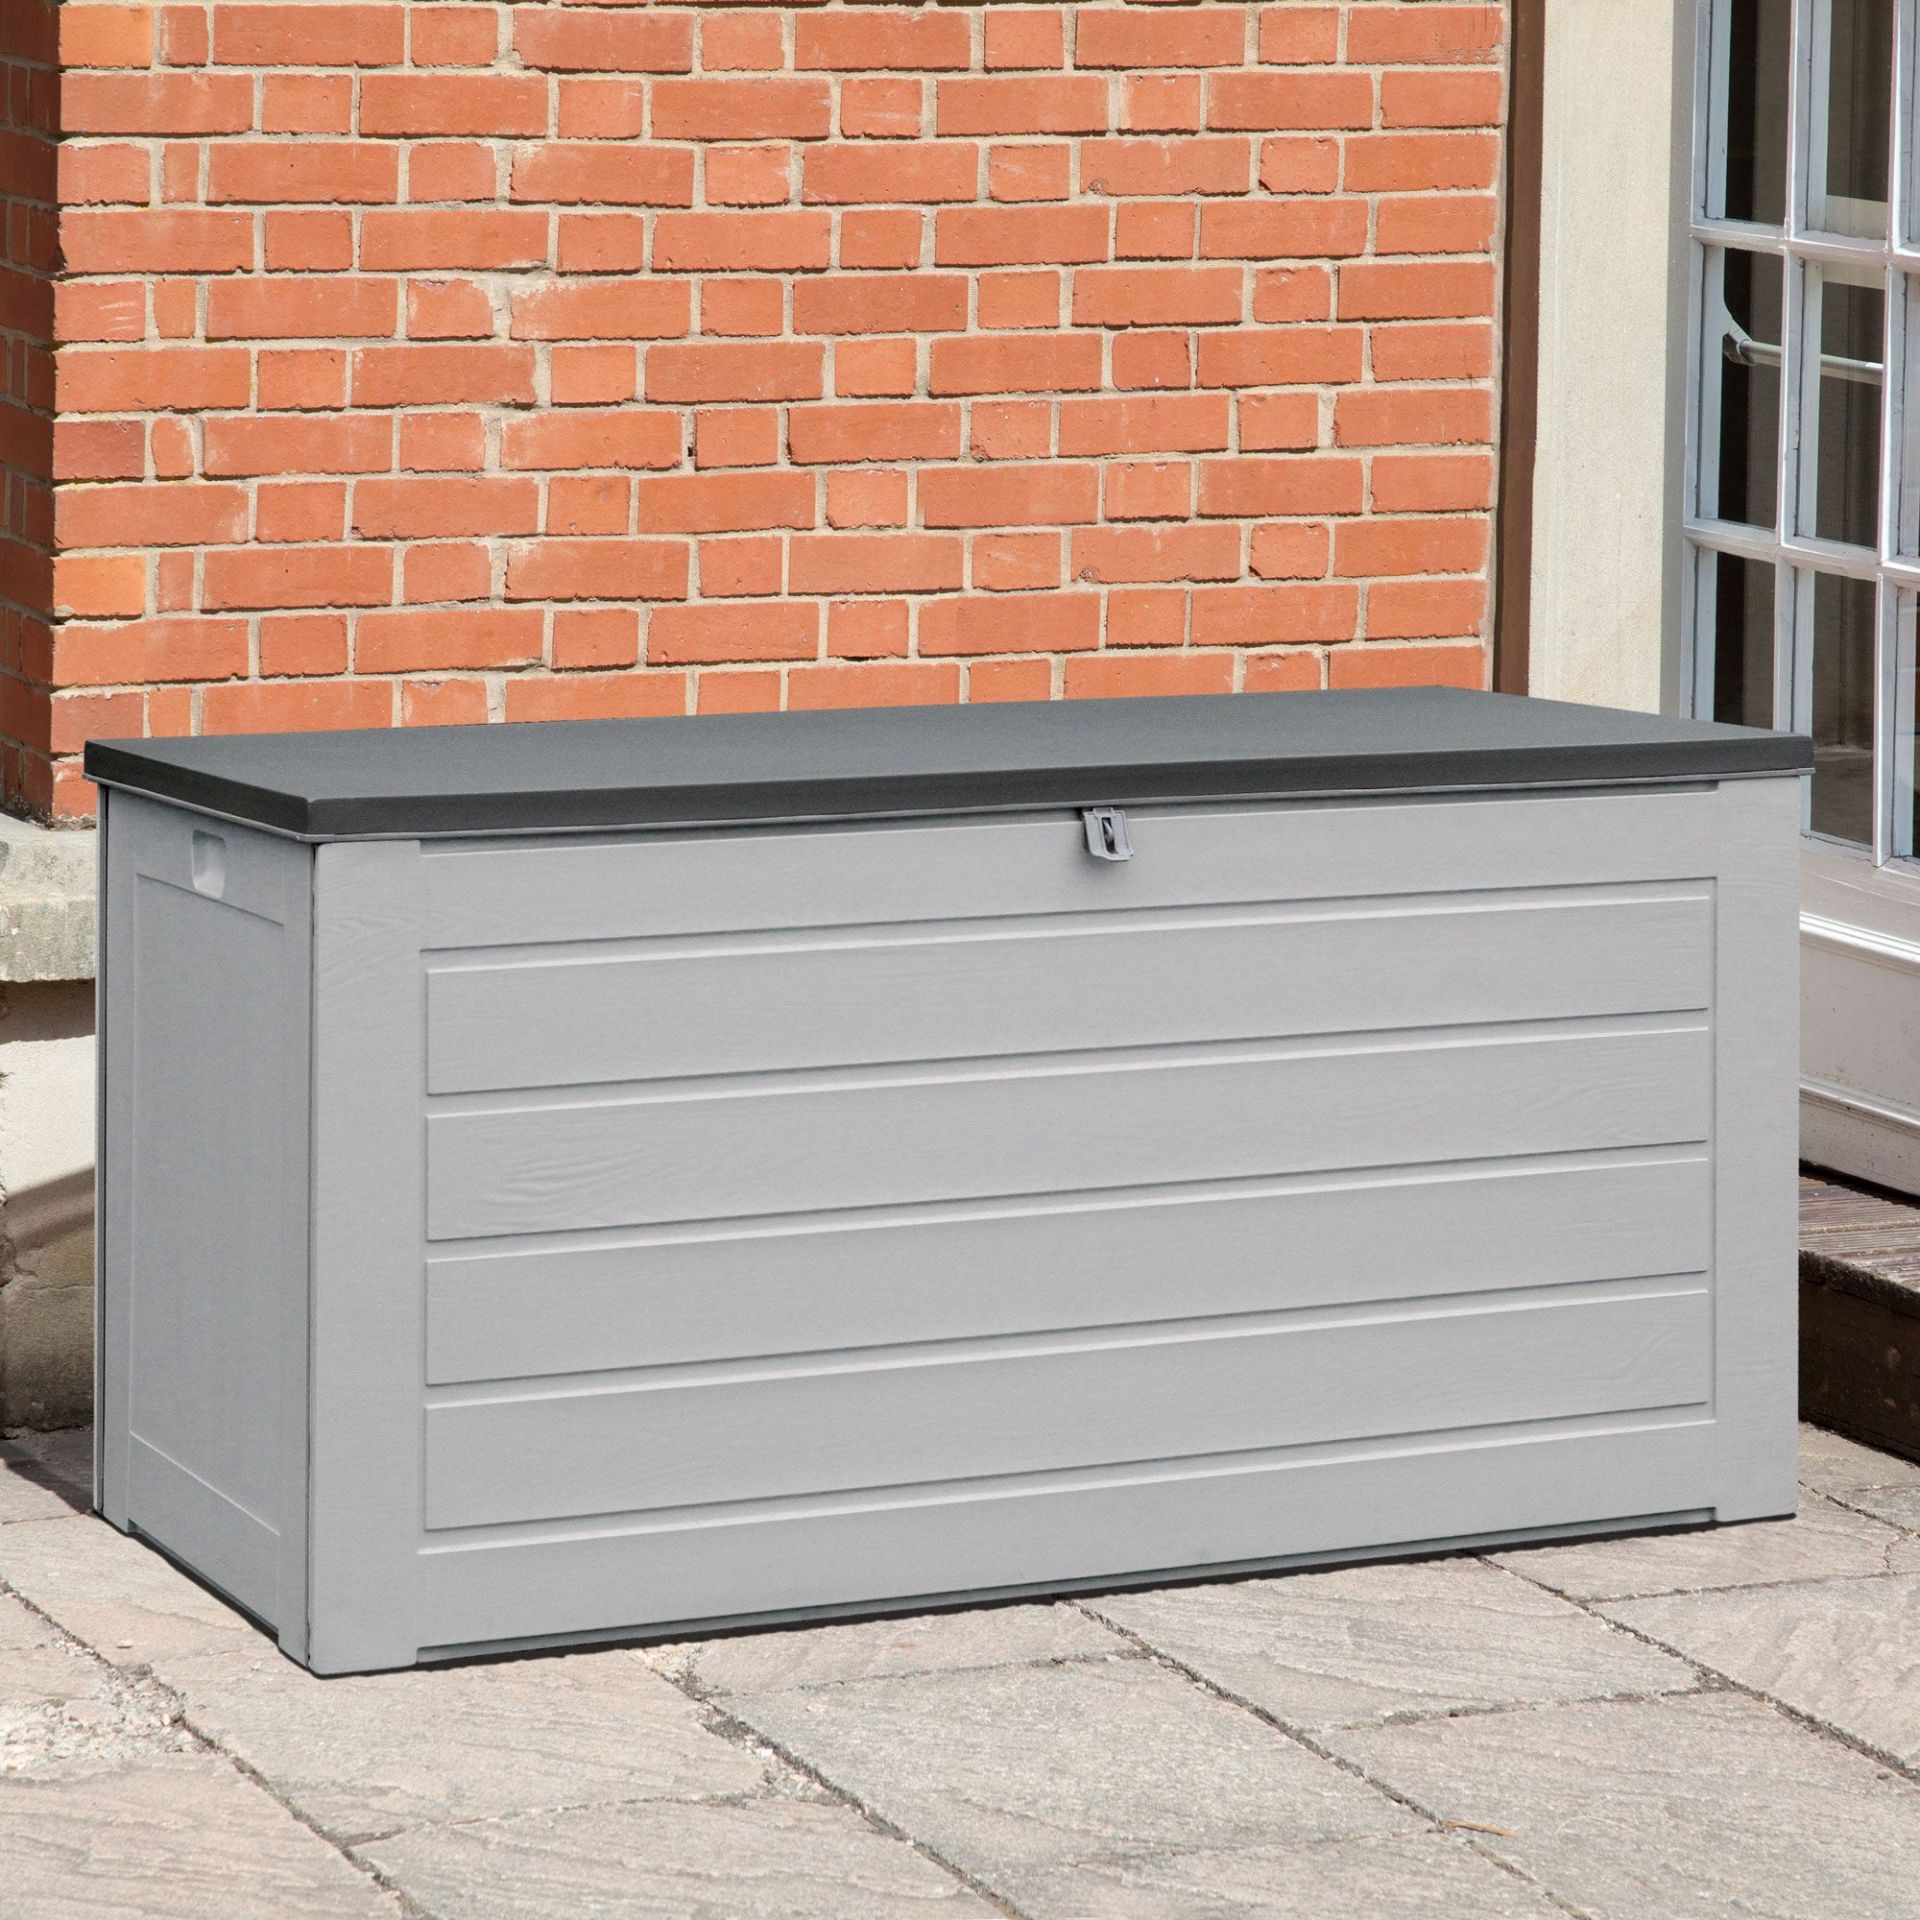 WINNIPEG OUTDOOR WOOD EFFECT 680L PP STORAGE GARDEN BOX WITH GAS LIFTS BRAND NEW RRP £208.99